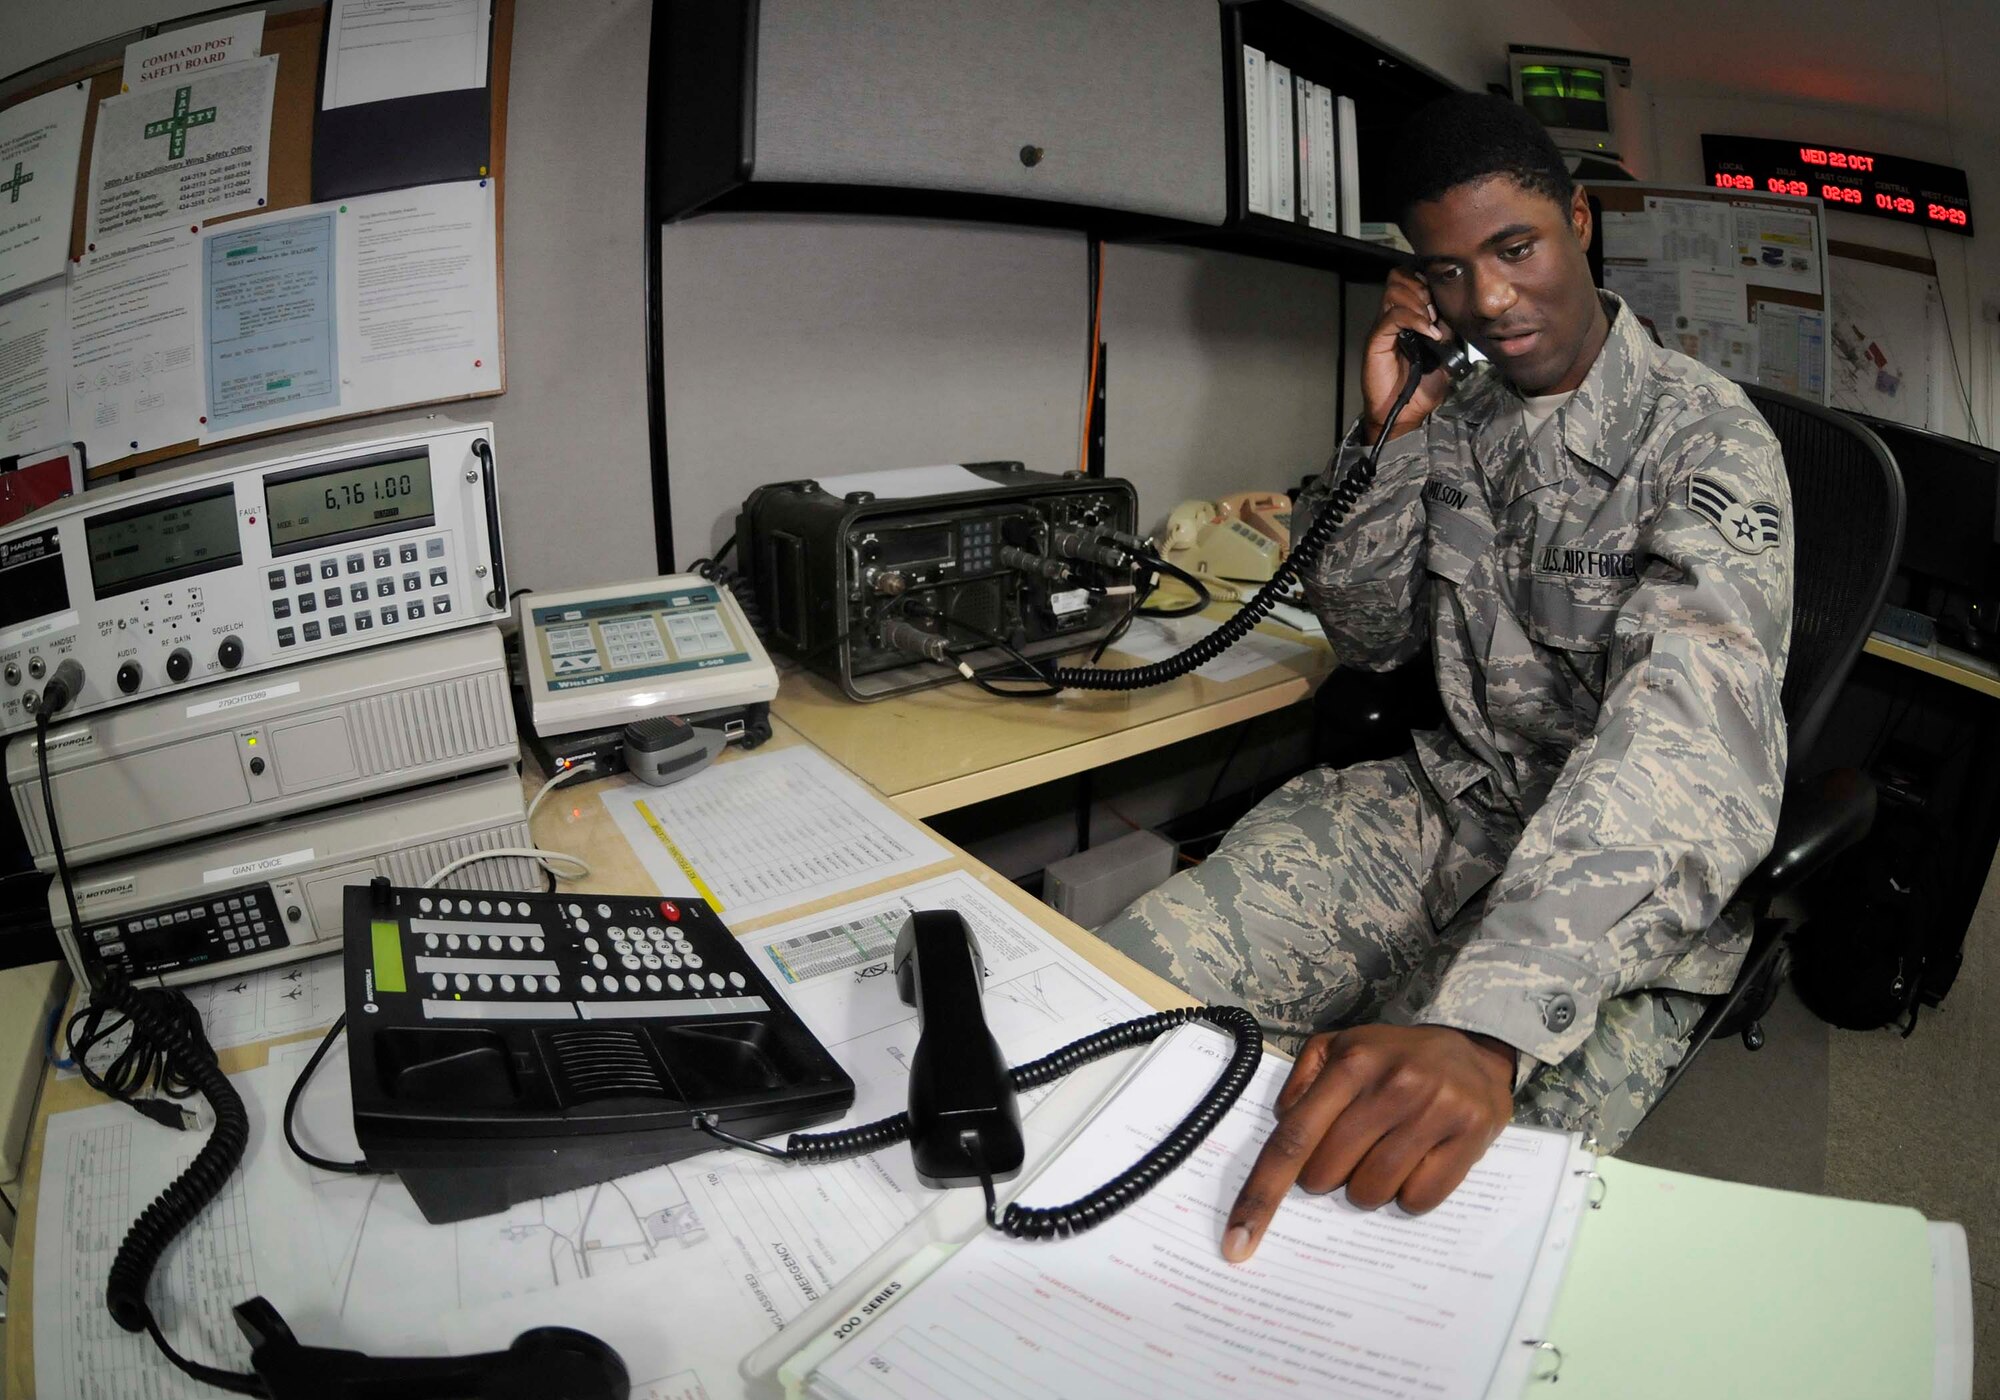 SOUTHWEST ASIA -- Senior Airman Paul Wilson, Jr., emergency actions controller with the 380th Air Expeditionary Wing Command Post, relays vital information to commanders and first responders during in-flight emergencies. Airman Wilson is deployed from the 52nd Fighter Wing, Spangdahlem Air Base, Germany. (Photo by 1st Lt. Michael V. Frye/Released)